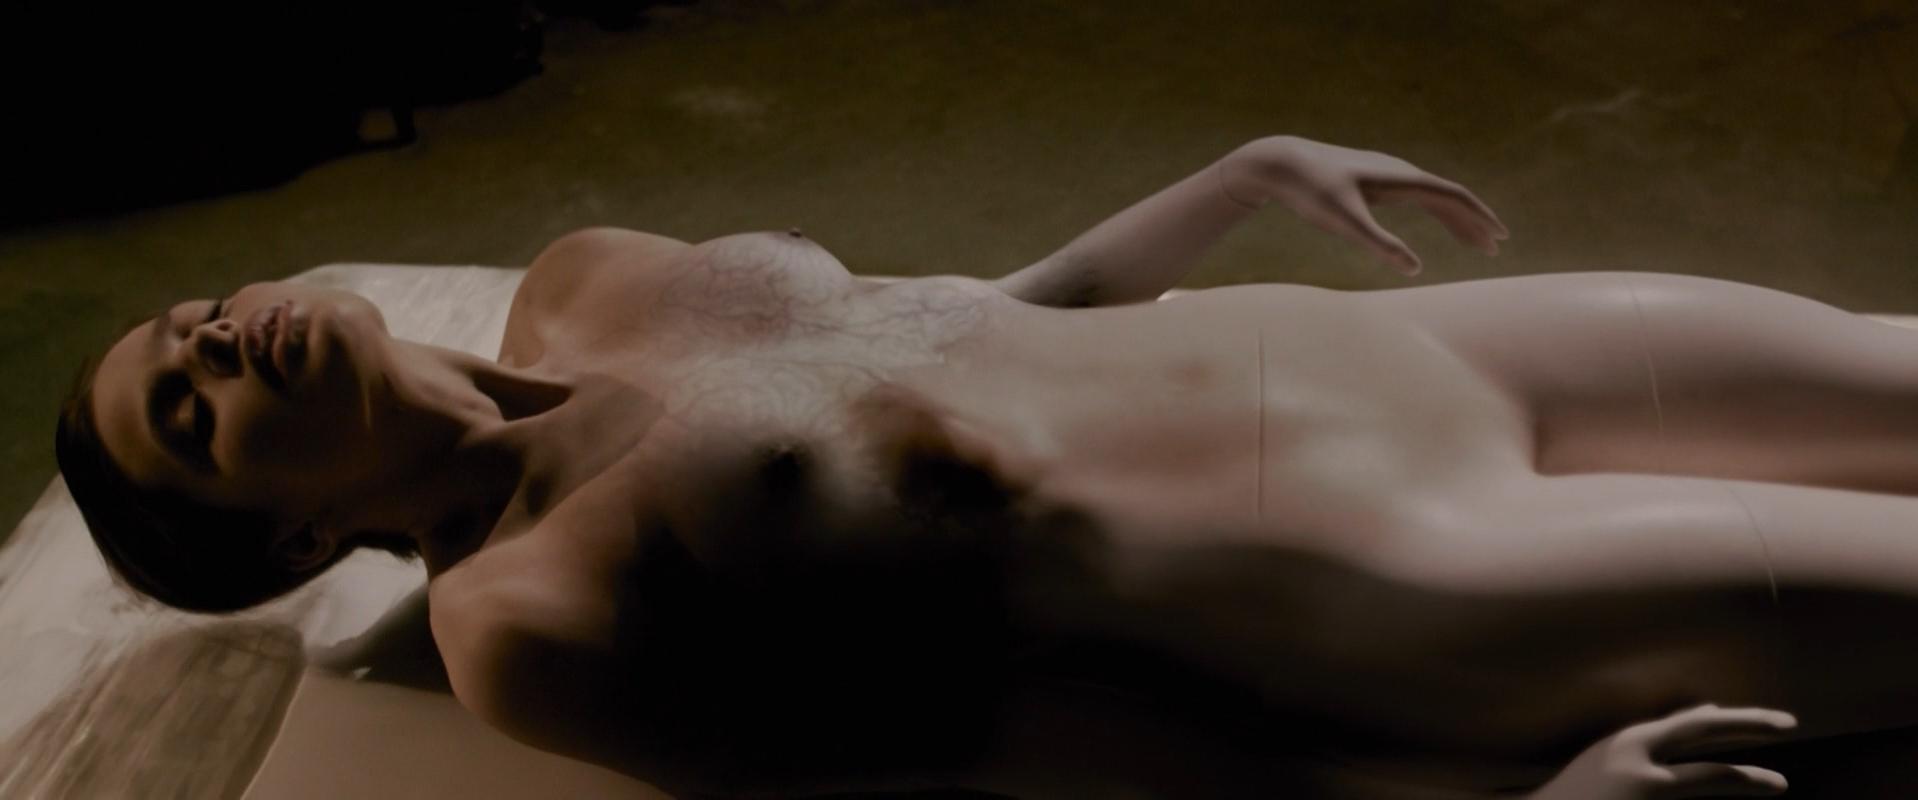 Silent hill nude